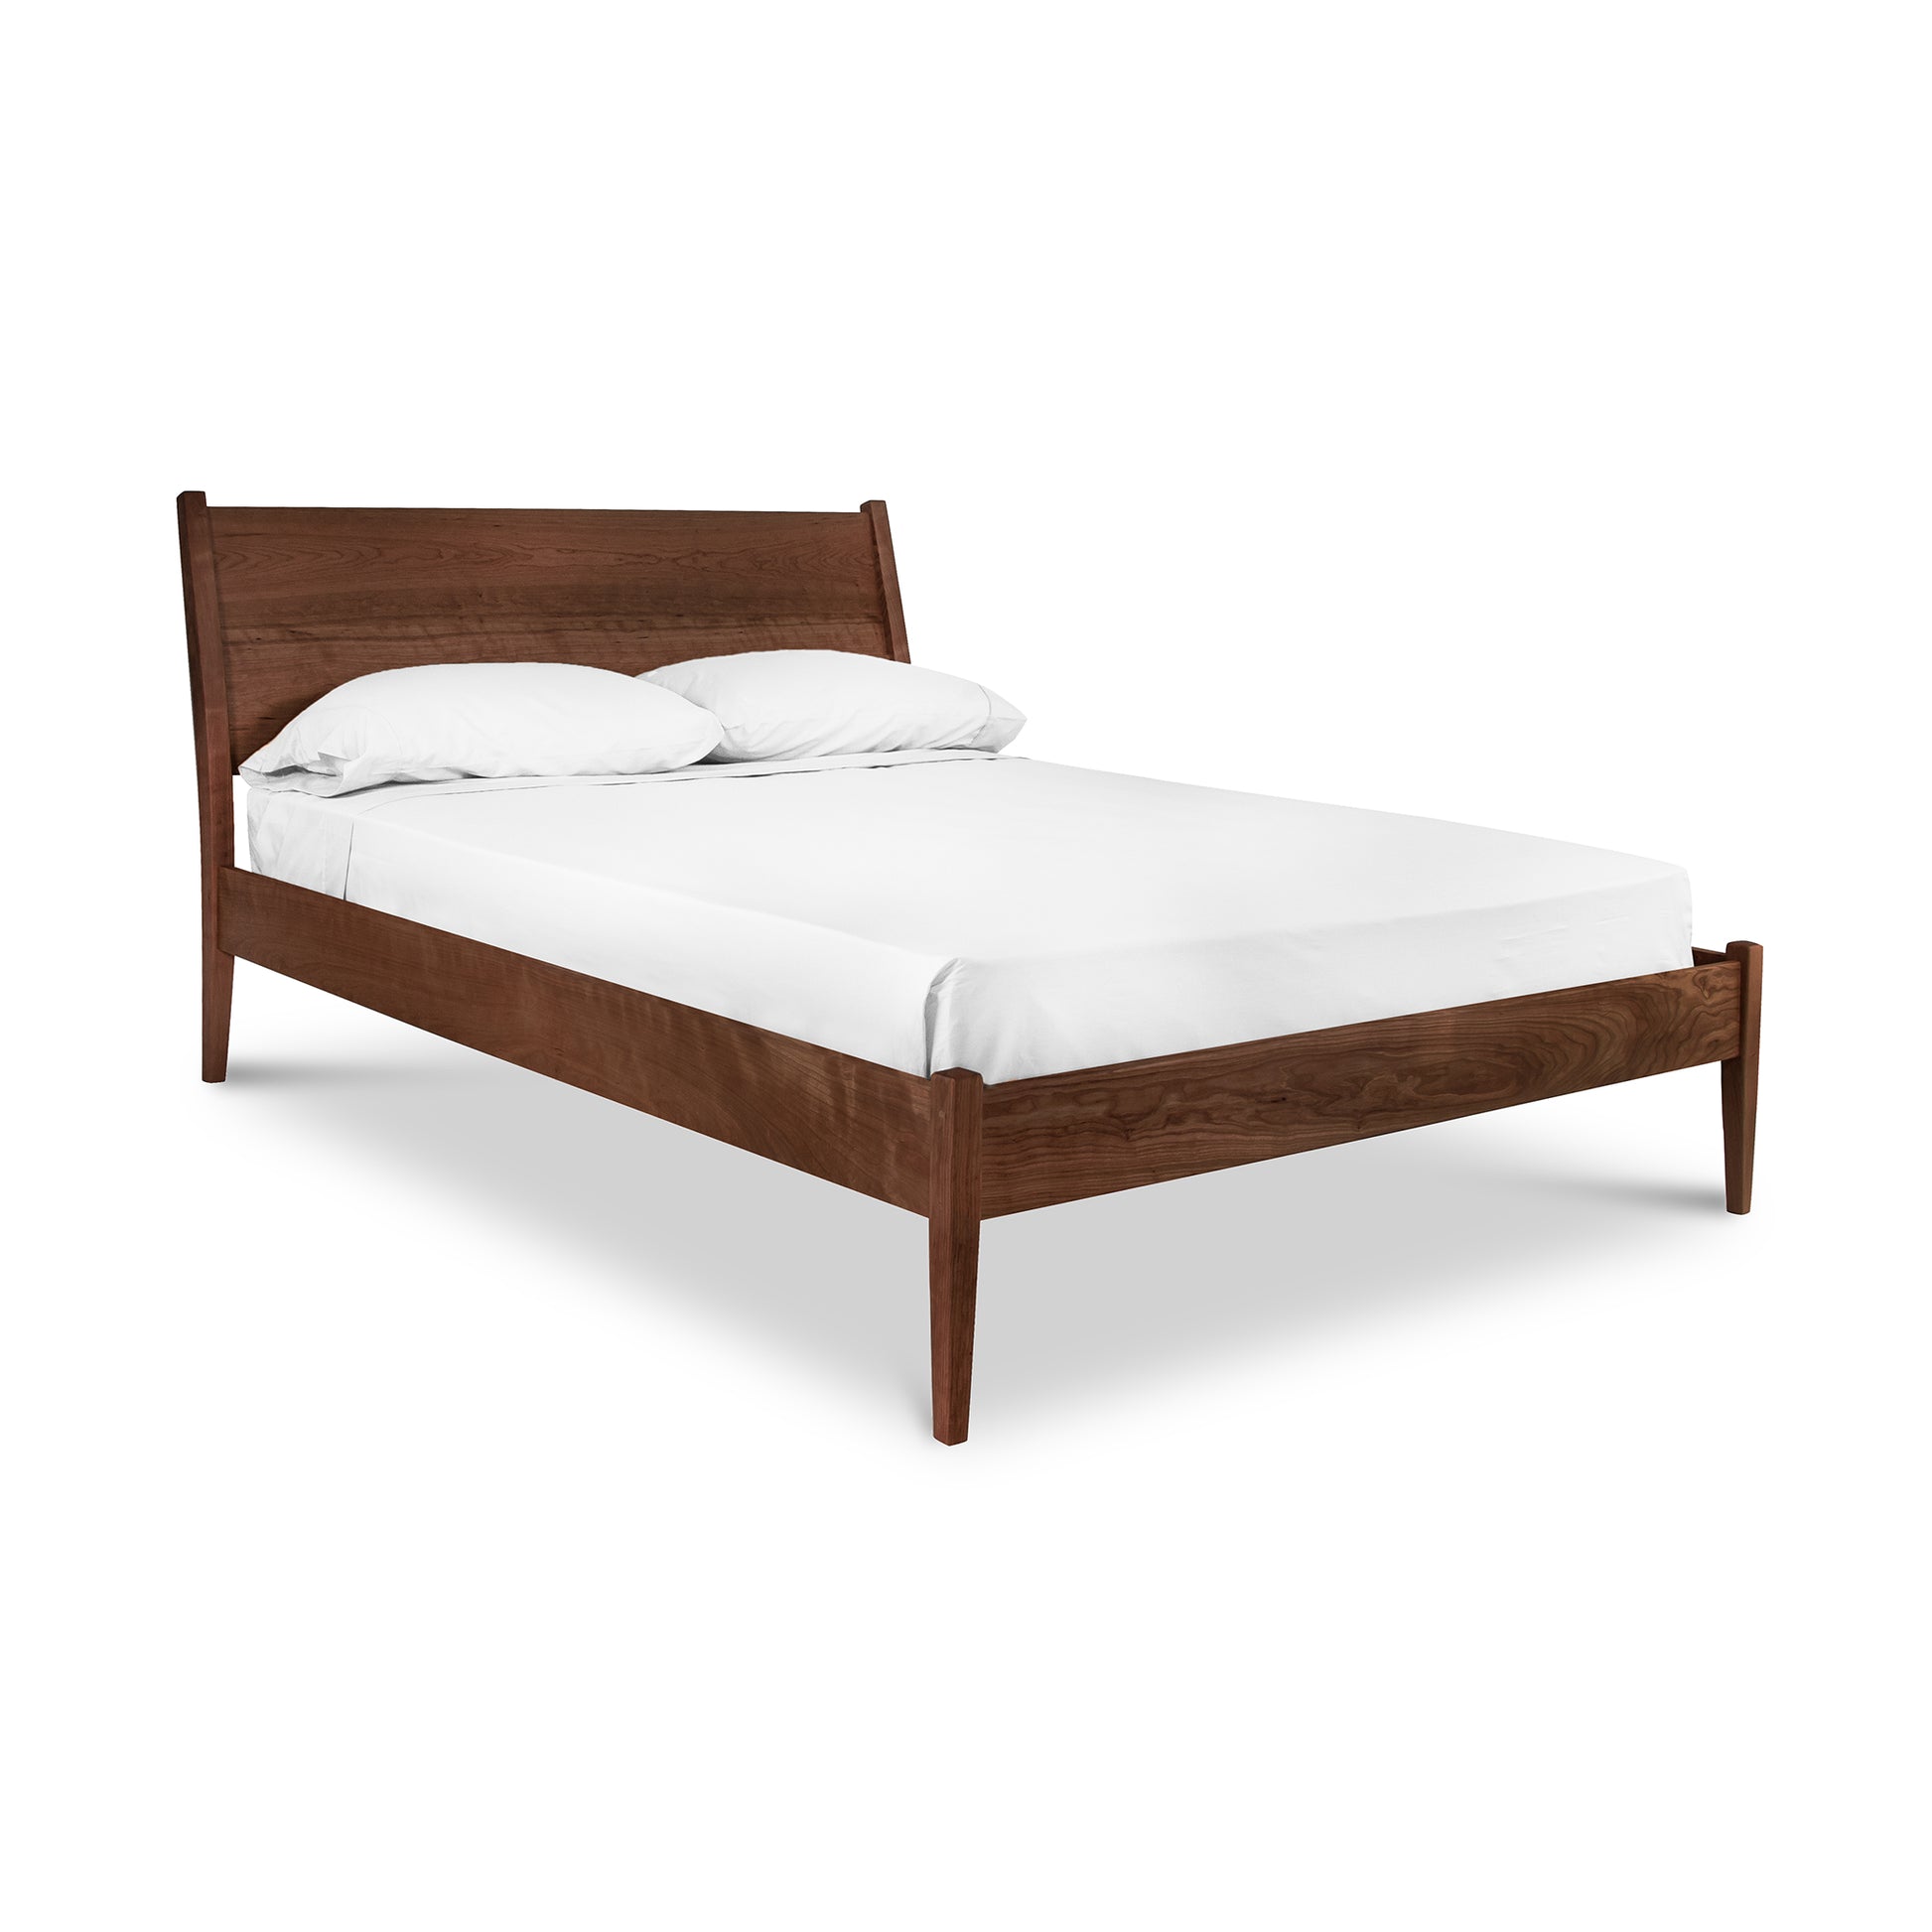 A Maple Corner Woodworks Andover Modern Incline Bed frame with a sloped headboard, supporting a white mattress and two pillows, isolated on a white background.